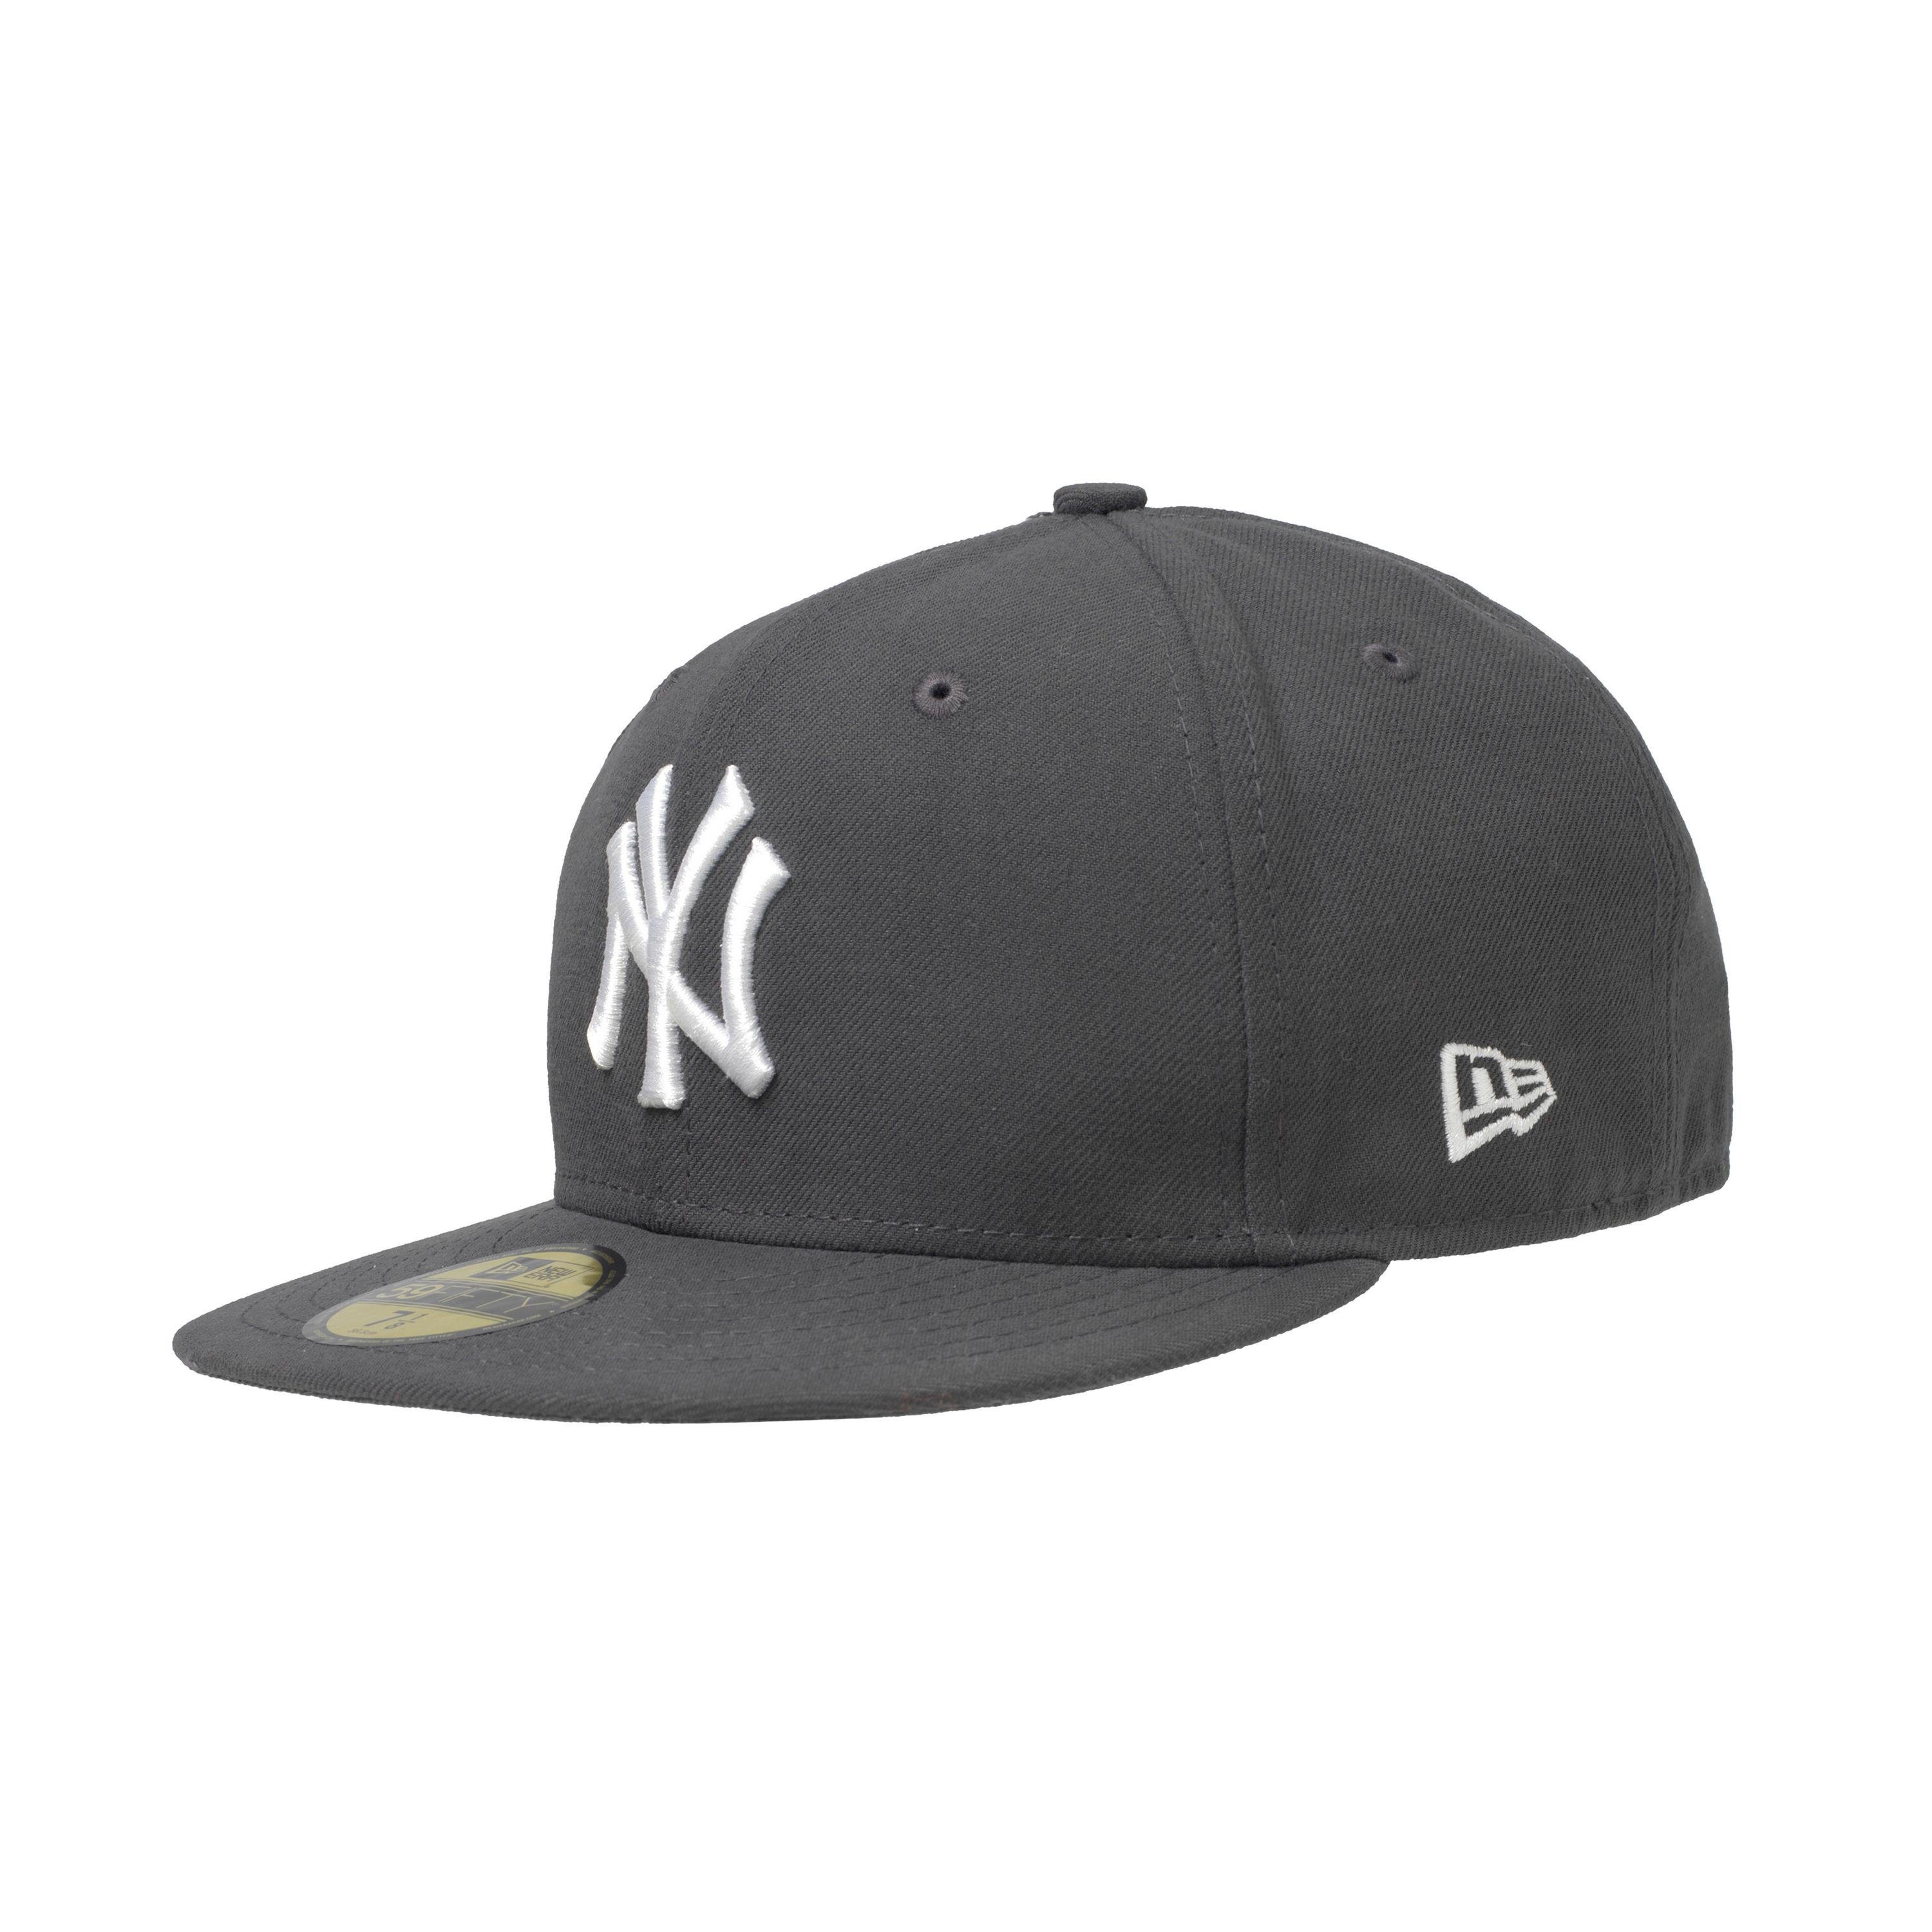 Top-Event New Era Fitted charcoal New Cap Yankees York 59Fifty